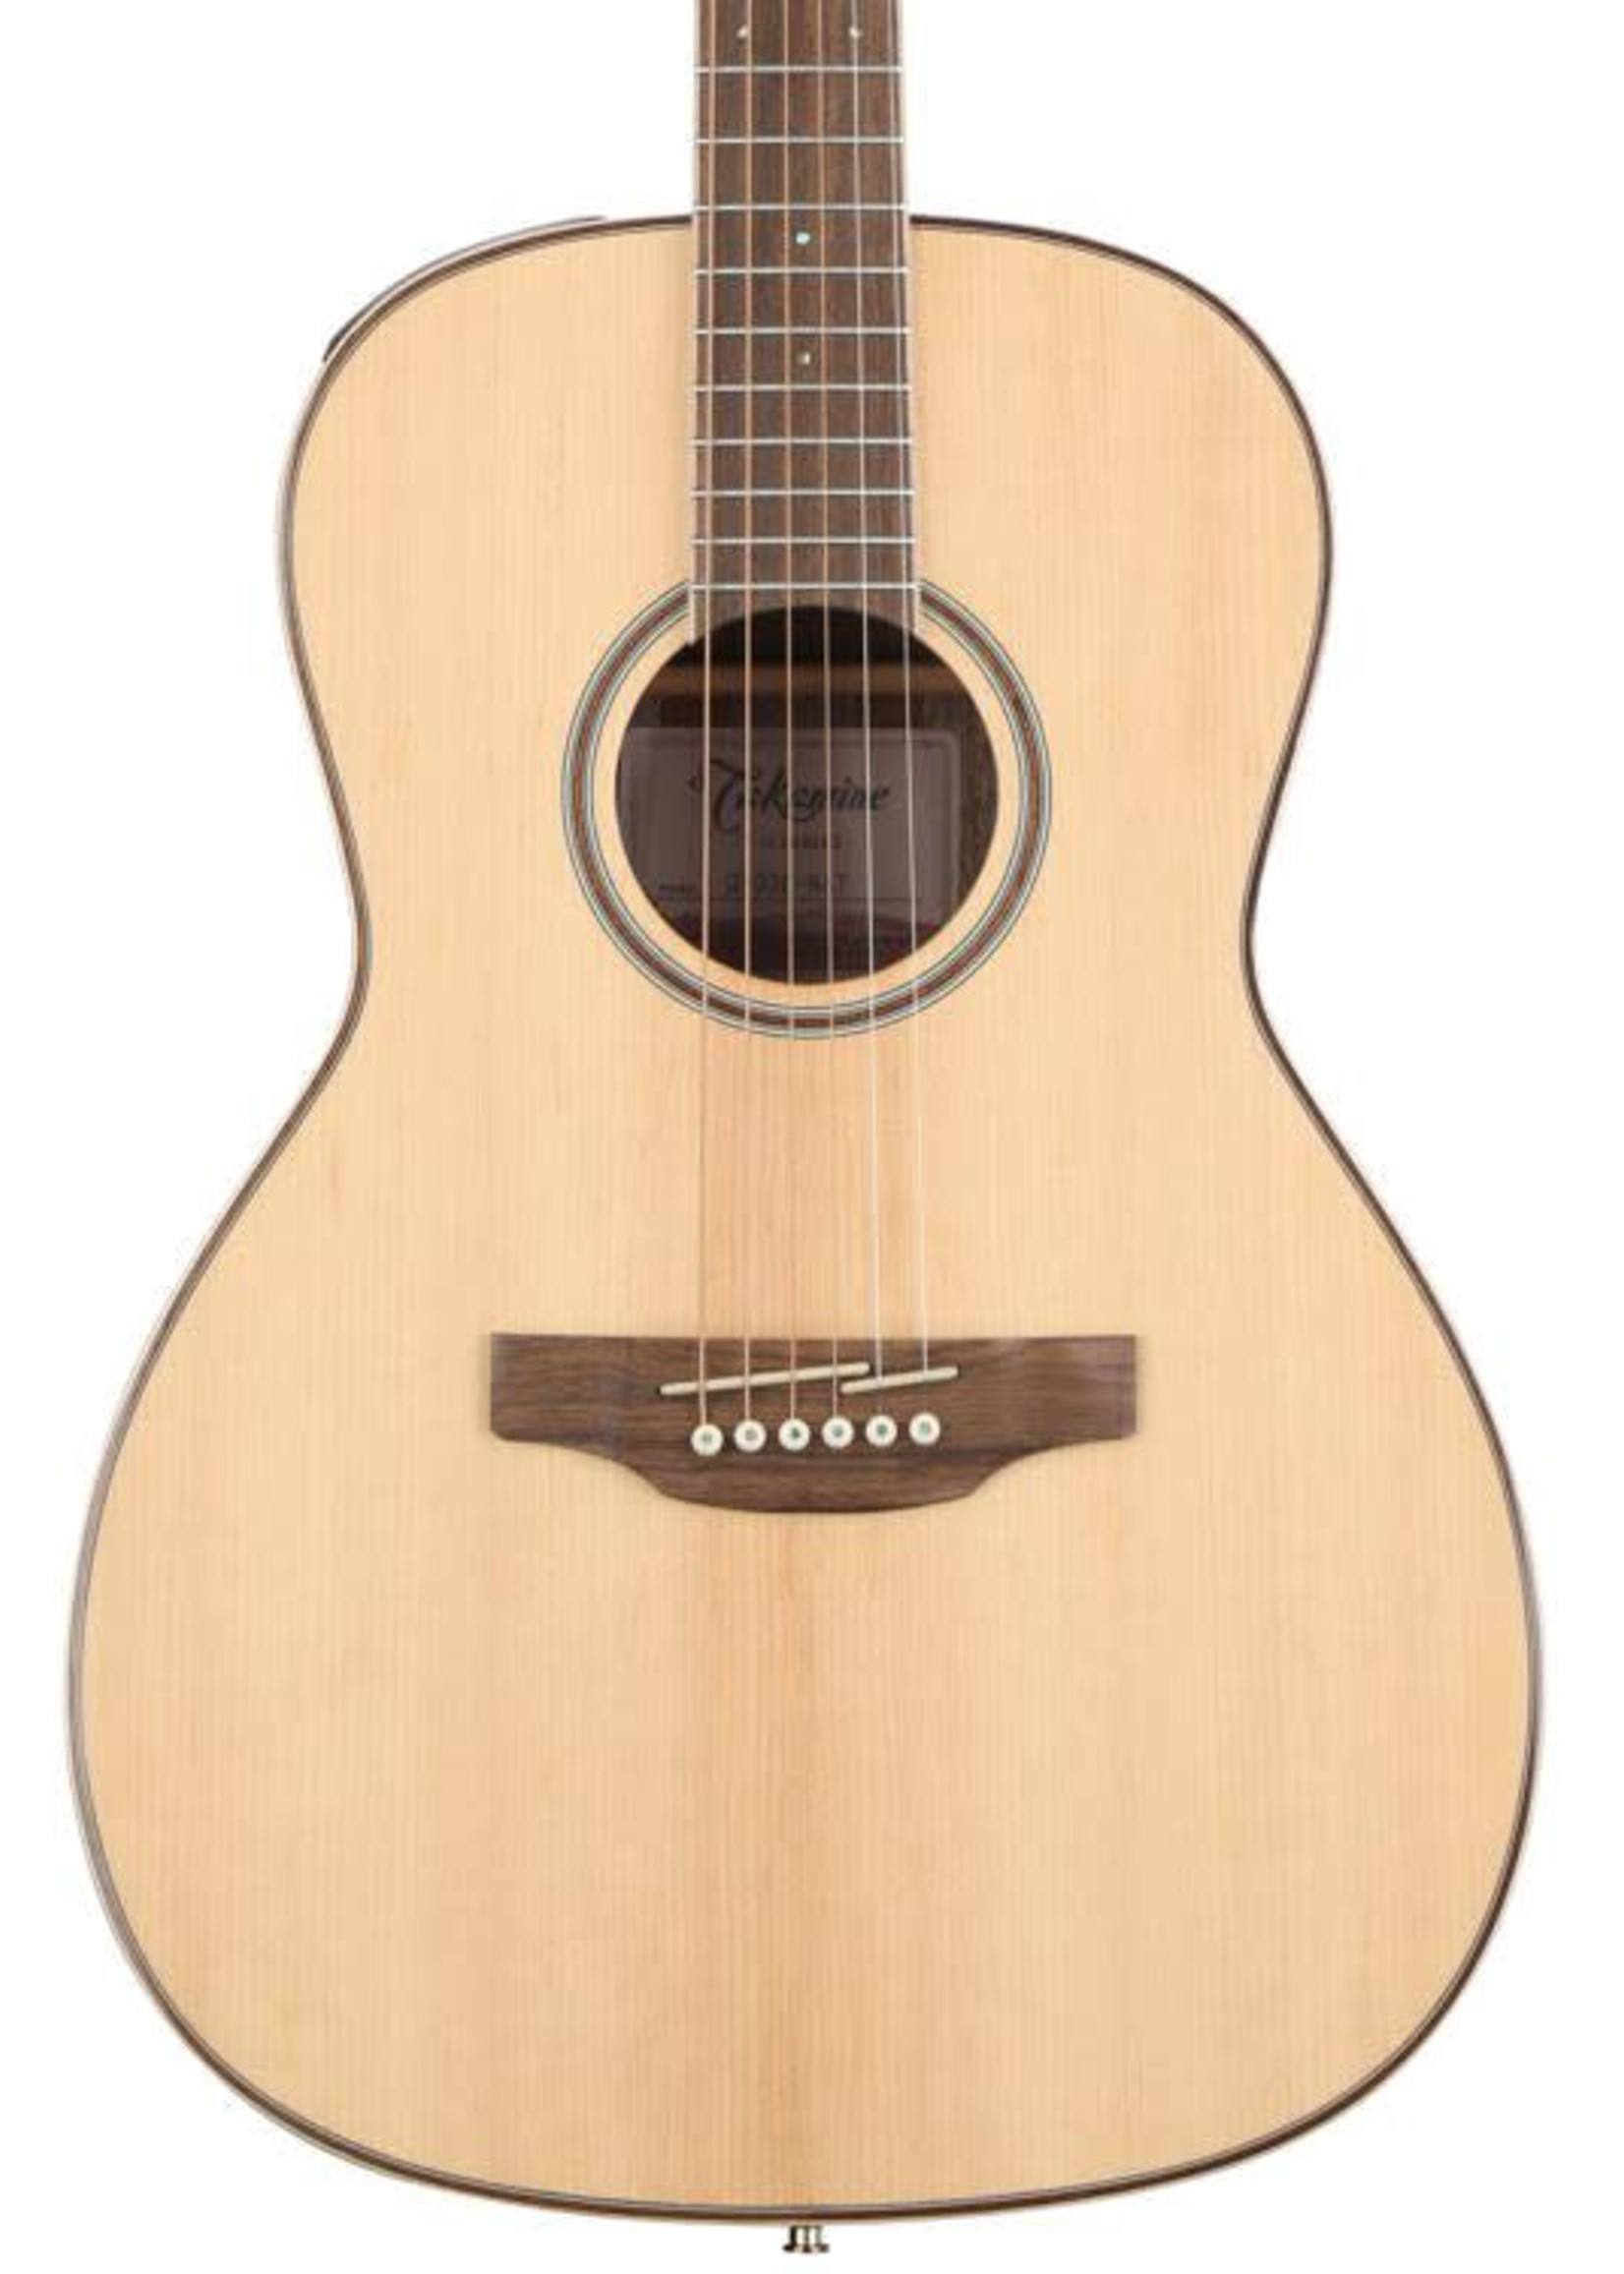 Takamine Takamine GY93E-NAT New Yorker Parlor Acoustic-Electric Guitar - Natural